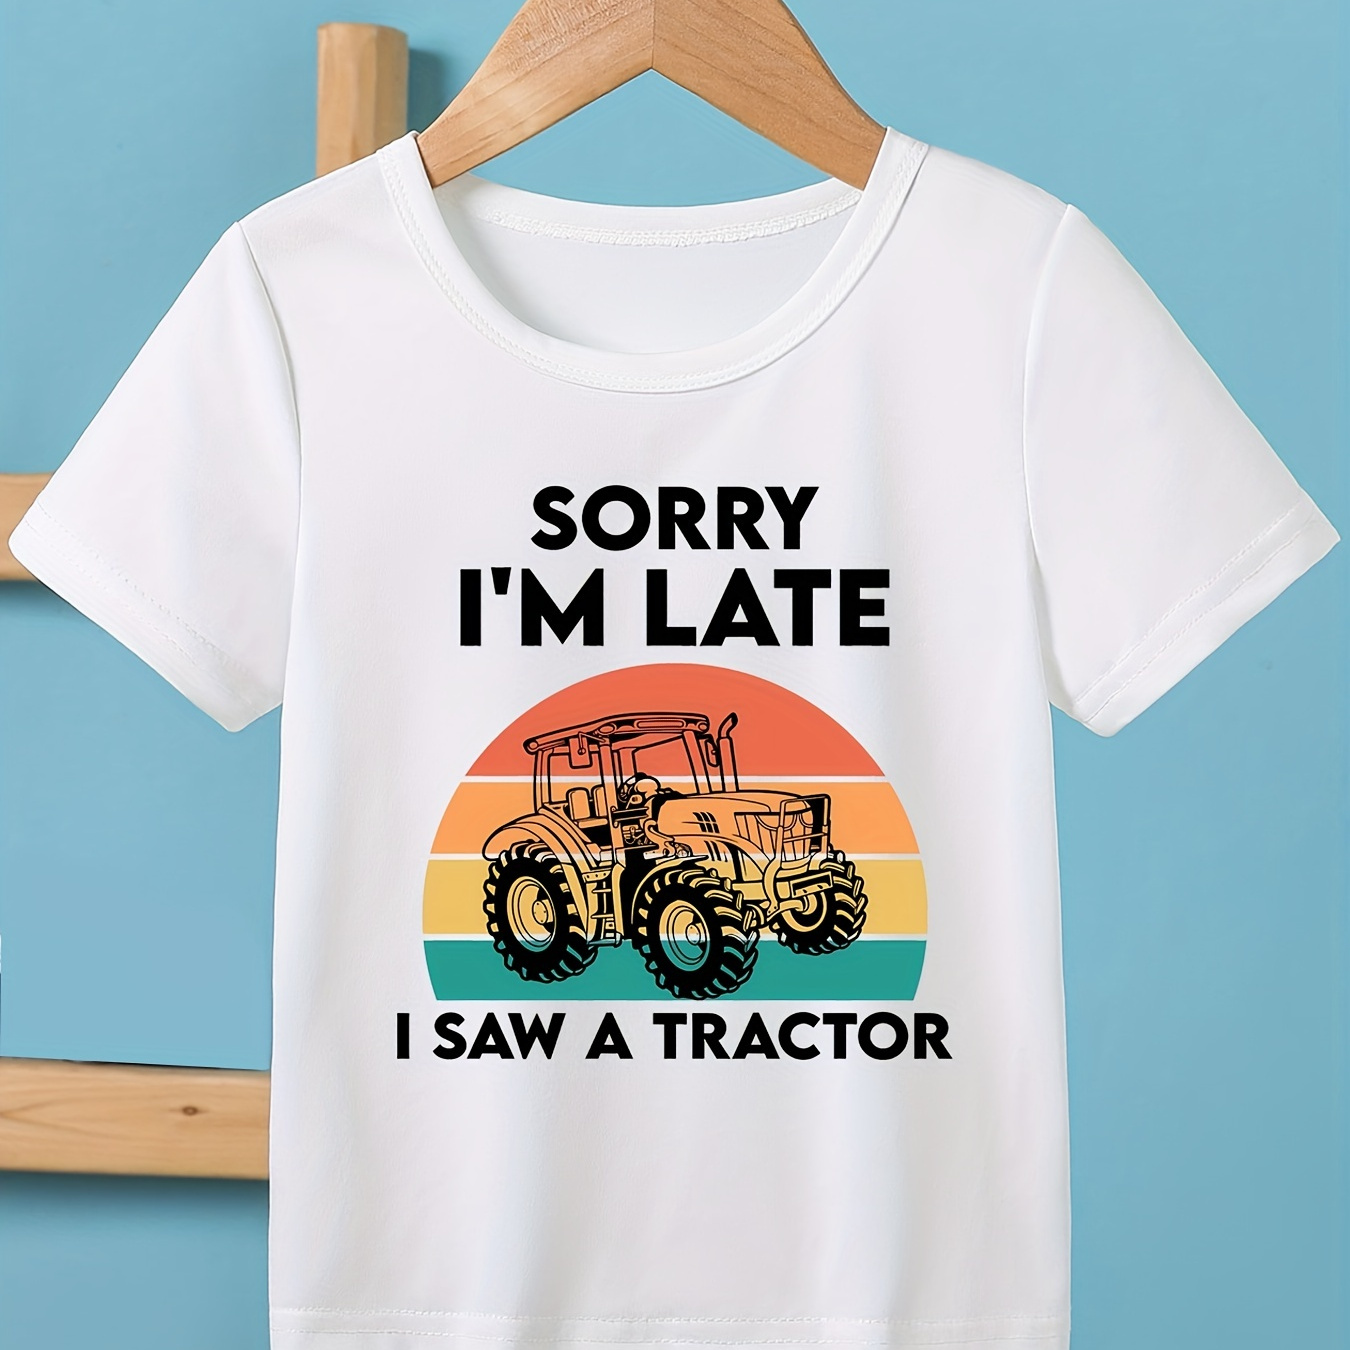 

sorry I'm Late, I Saw A Tractor" Round Neck T-shirt Tees Tops Casual Soft Comfortable Boys And Girls Summer Clothes